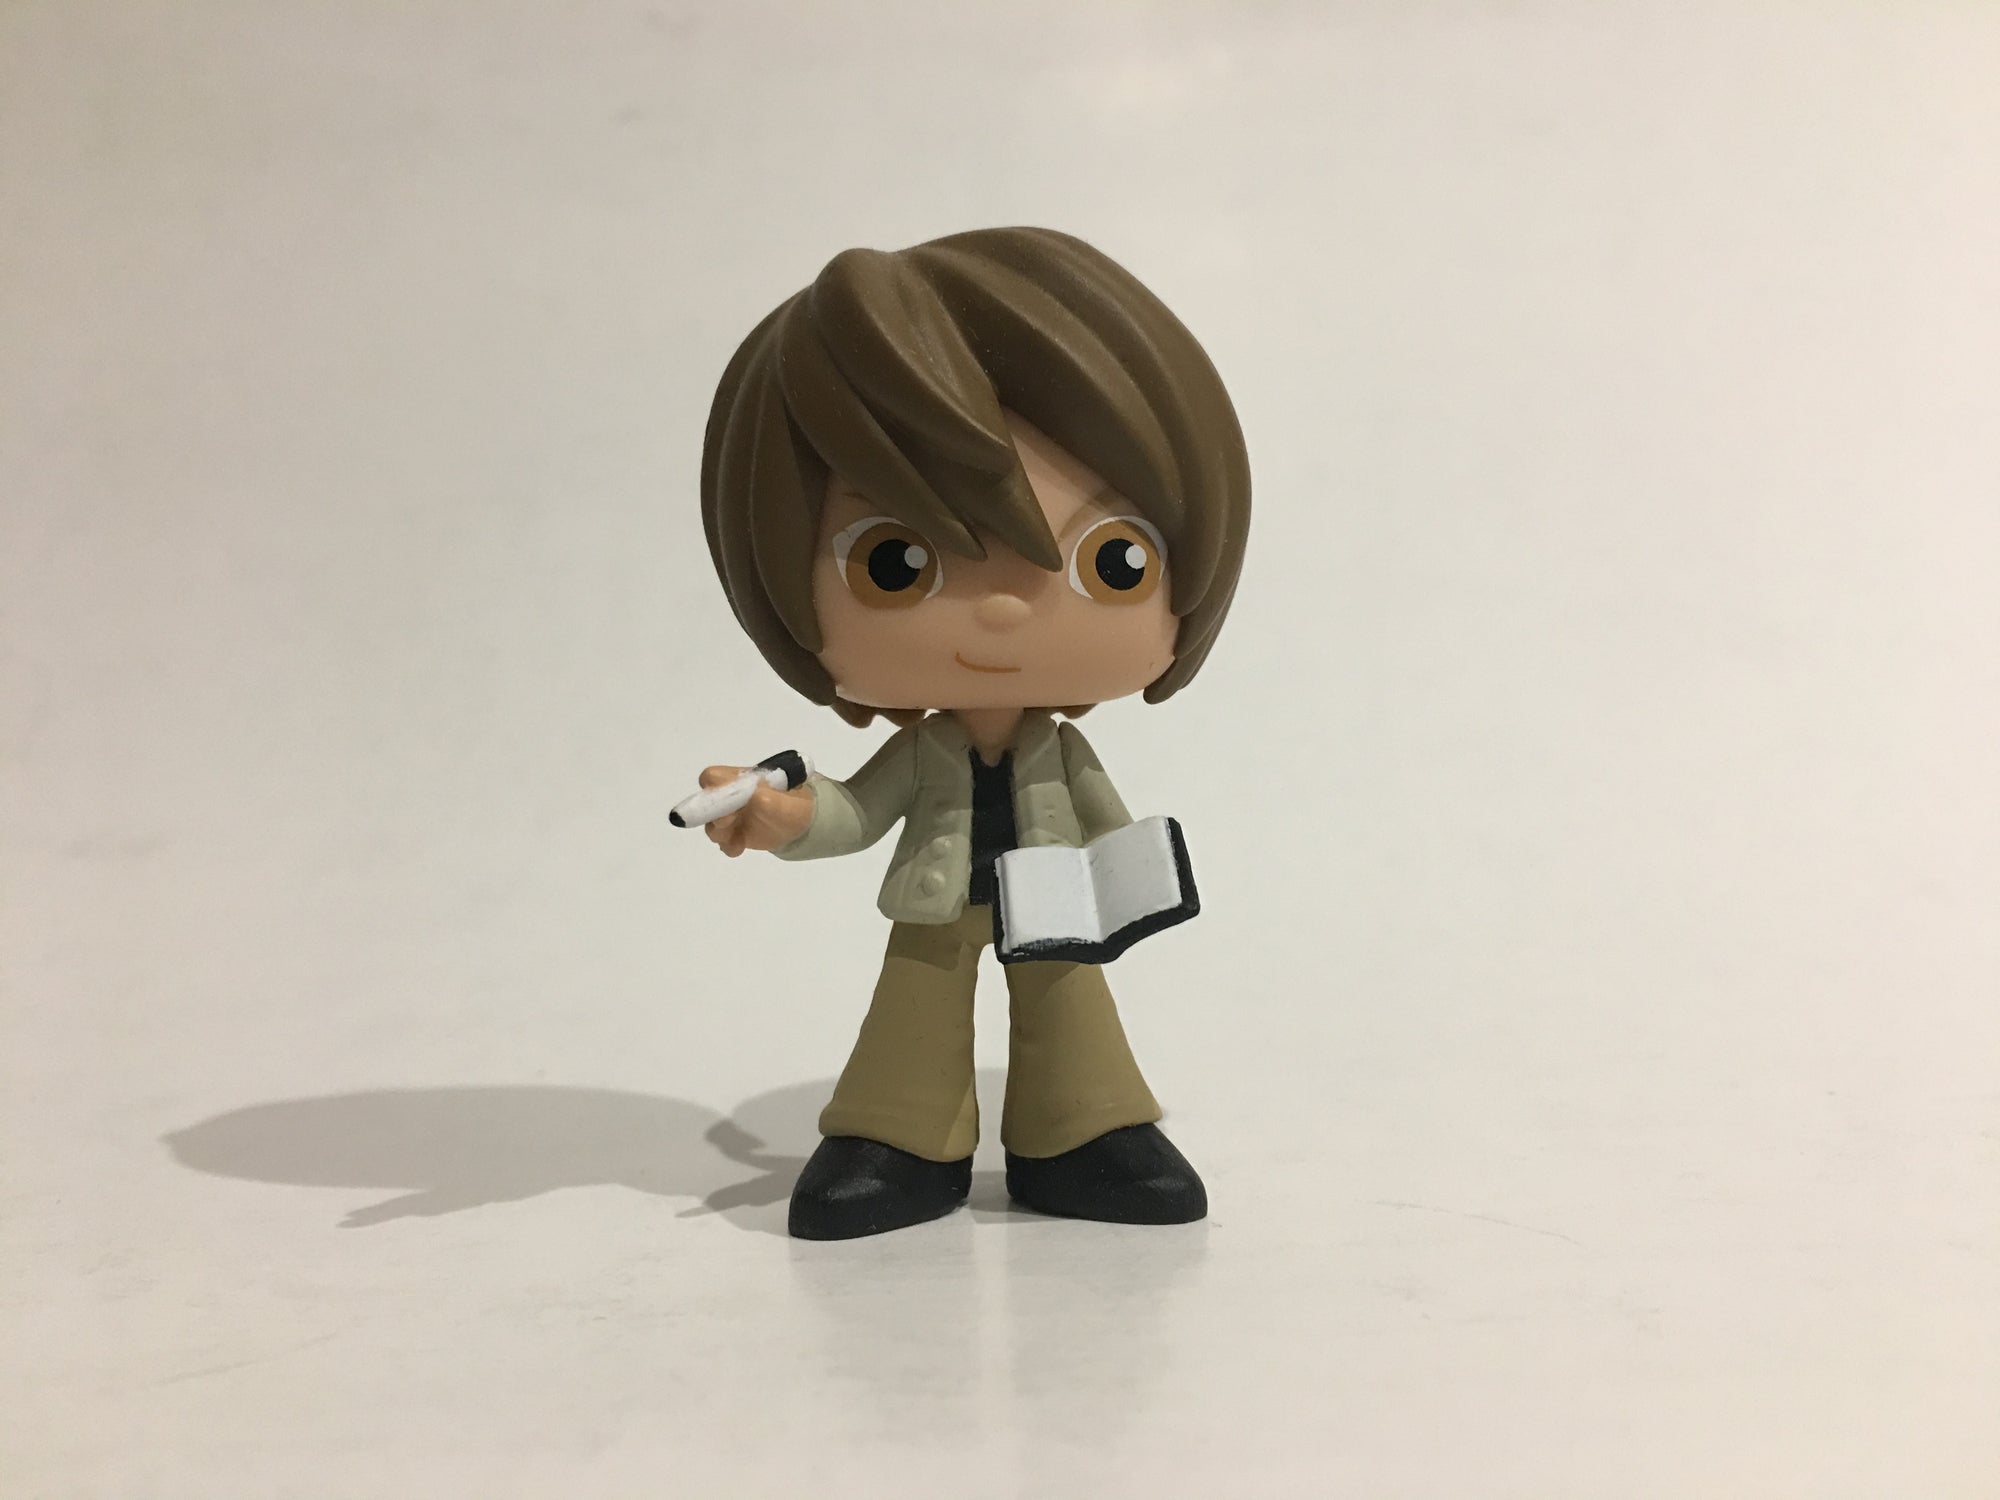 Shonen Jump Best of Anime Series 2 Blind Box - Death Note L from Funko Mystery Minis